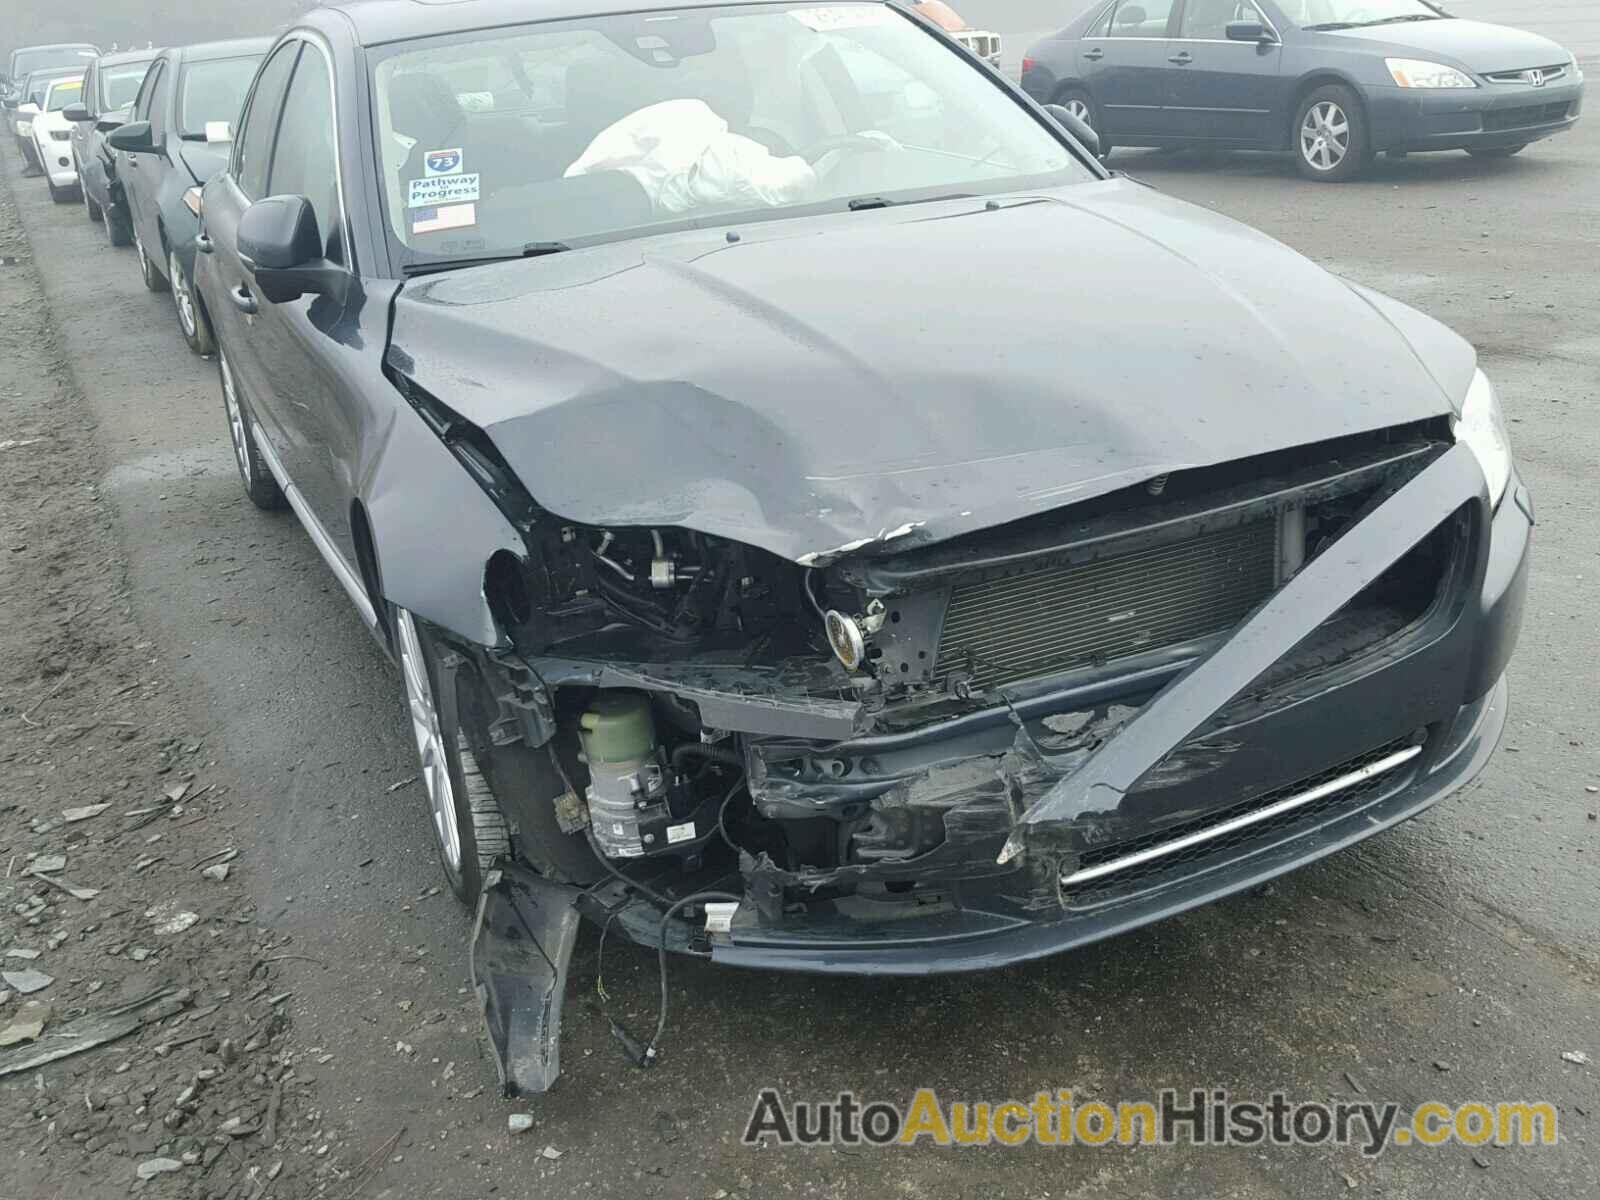 2013 VOLVO S80 3.2, YV1952AS1D1166980